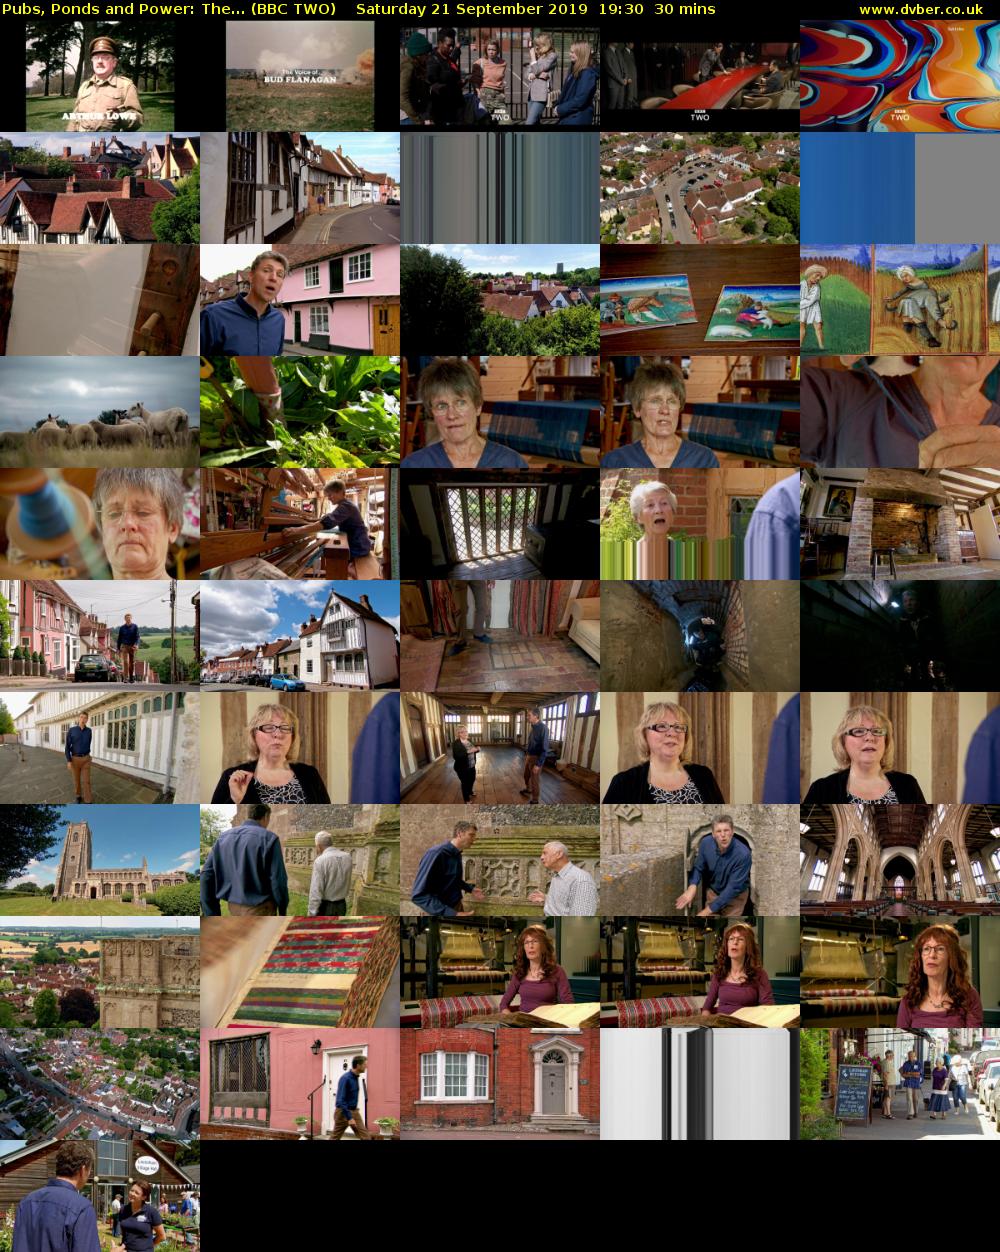 Pubs, Ponds and Power: The... (BBC TWO) Saturday 21 September 2019 19:30 - 20:00